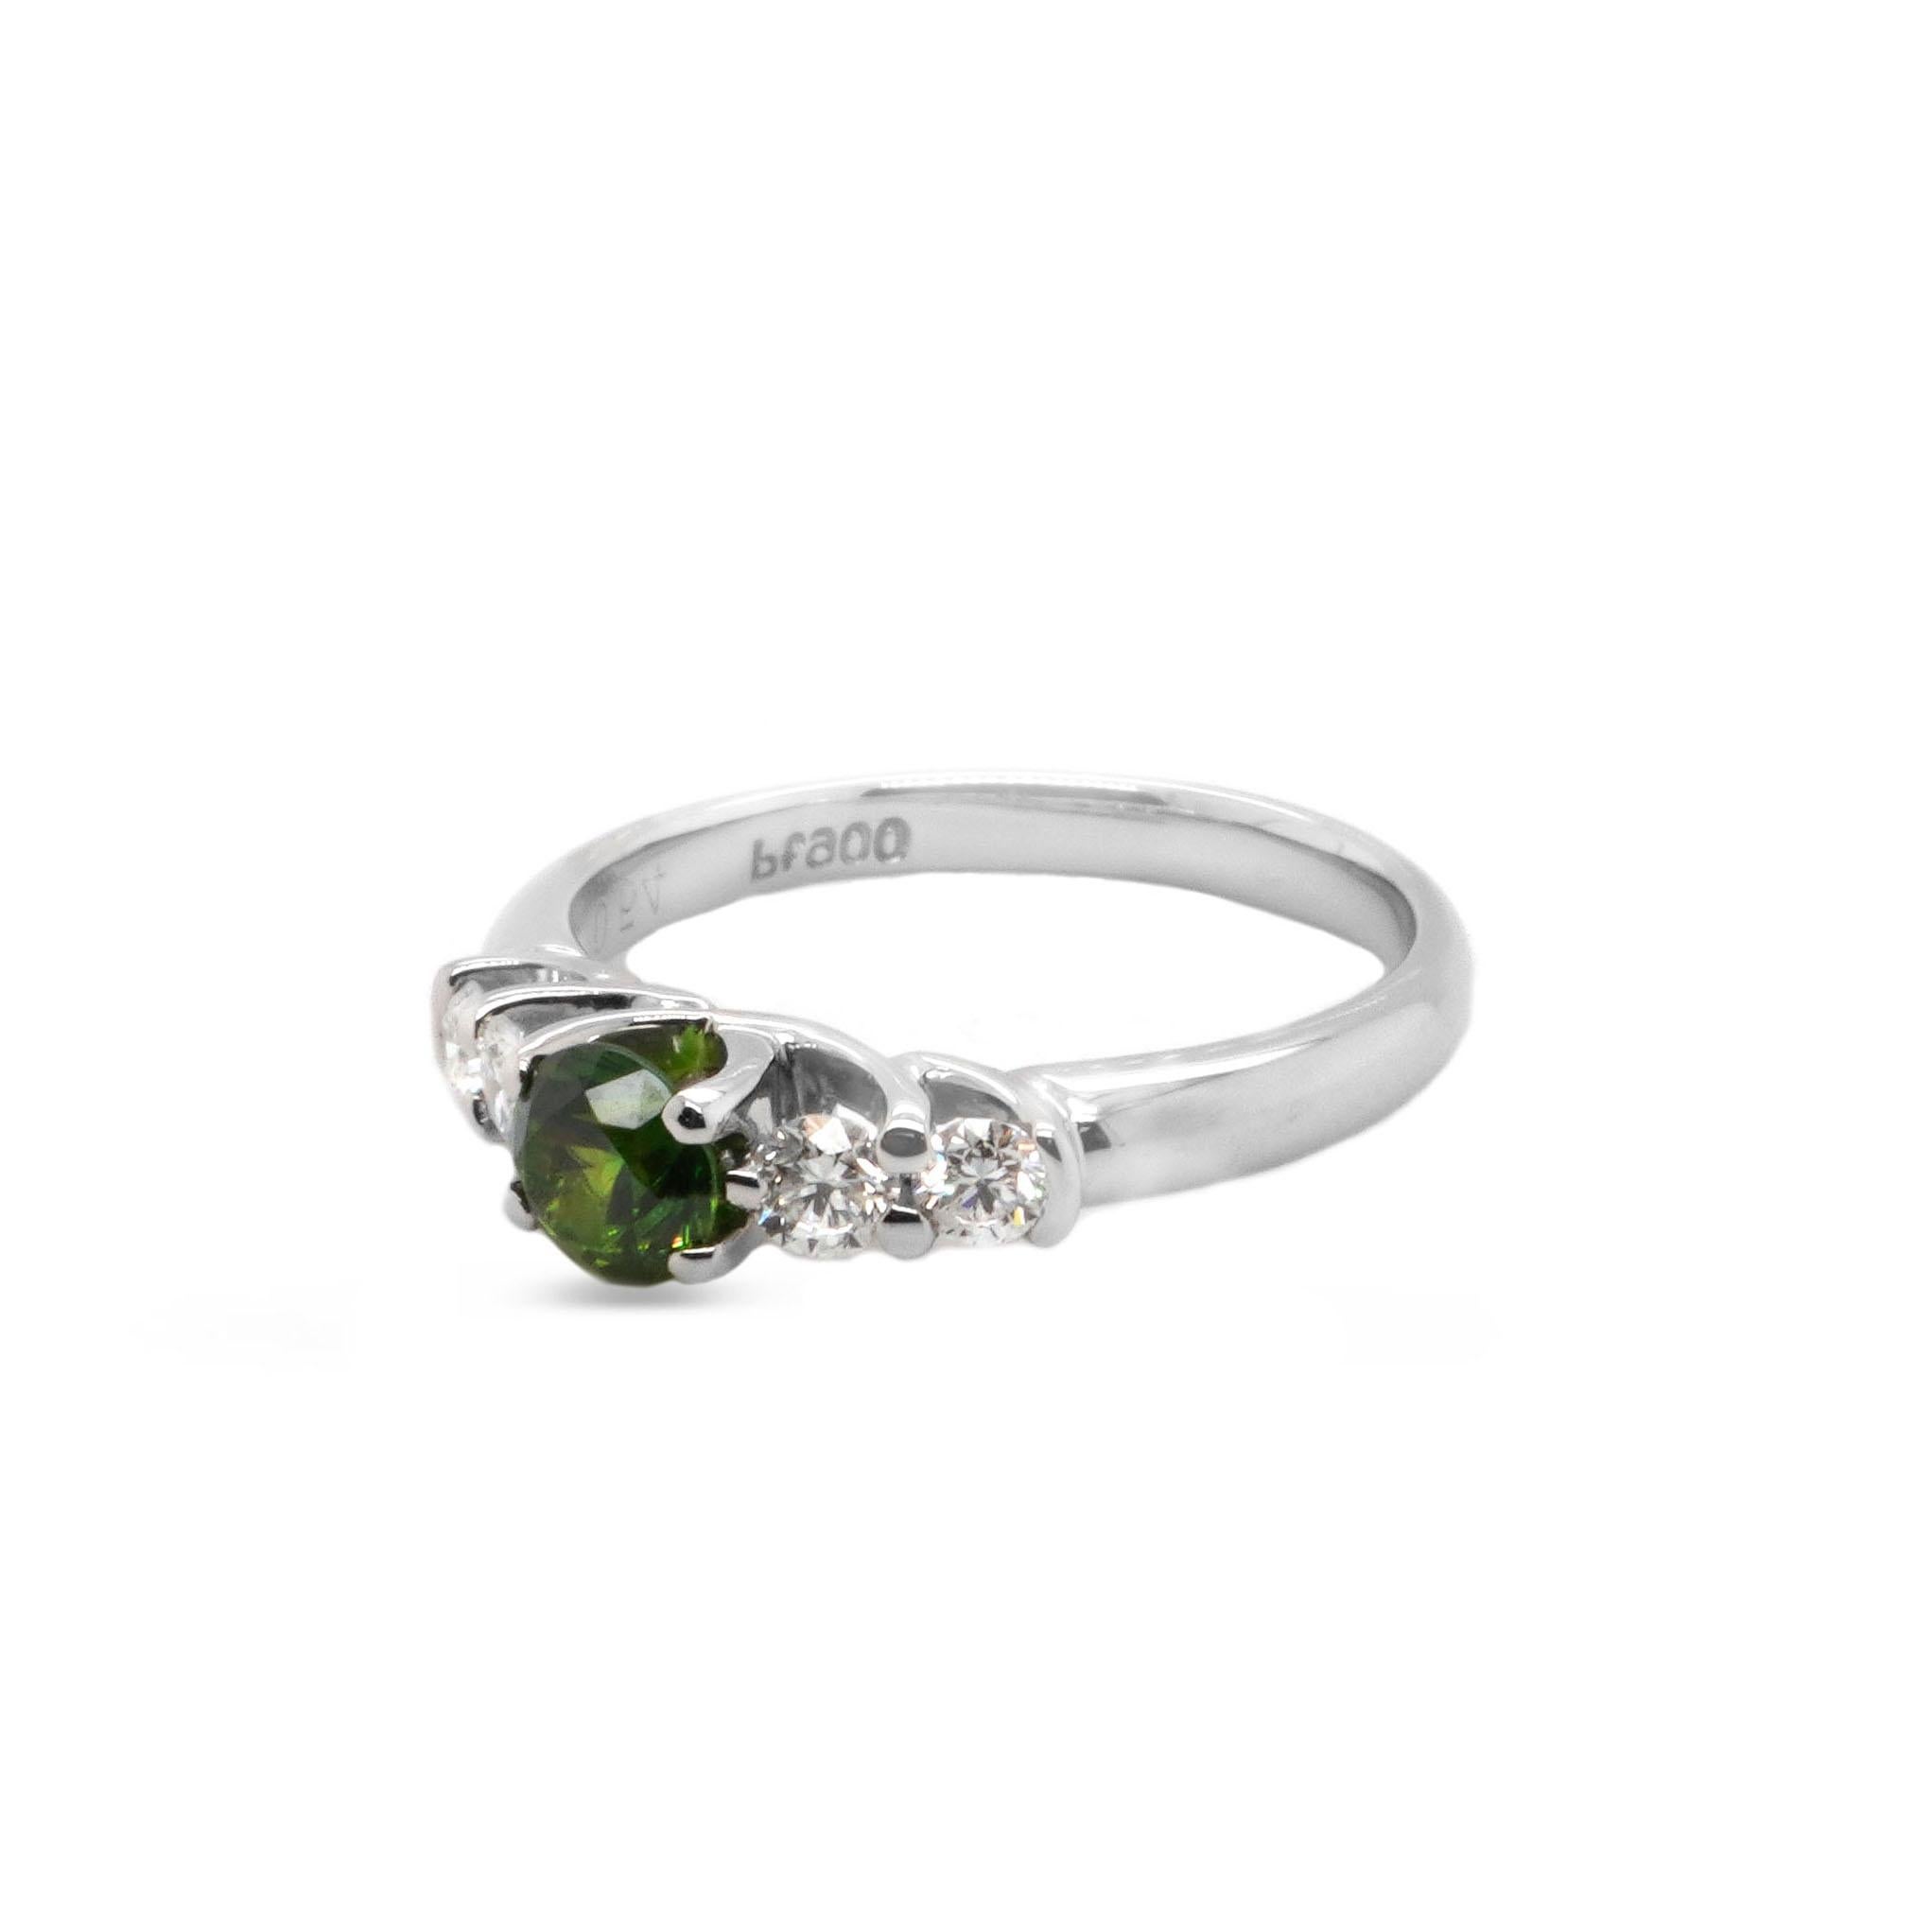 One of the rarest garnet varieties, Demantoid can have a green color that rivals emerald and a fire that exceeds diamond. Demantoids are highly prized by both gem collectors and jewelry enthusiasts. This solitaire ring consists of 0.54 carat CGL